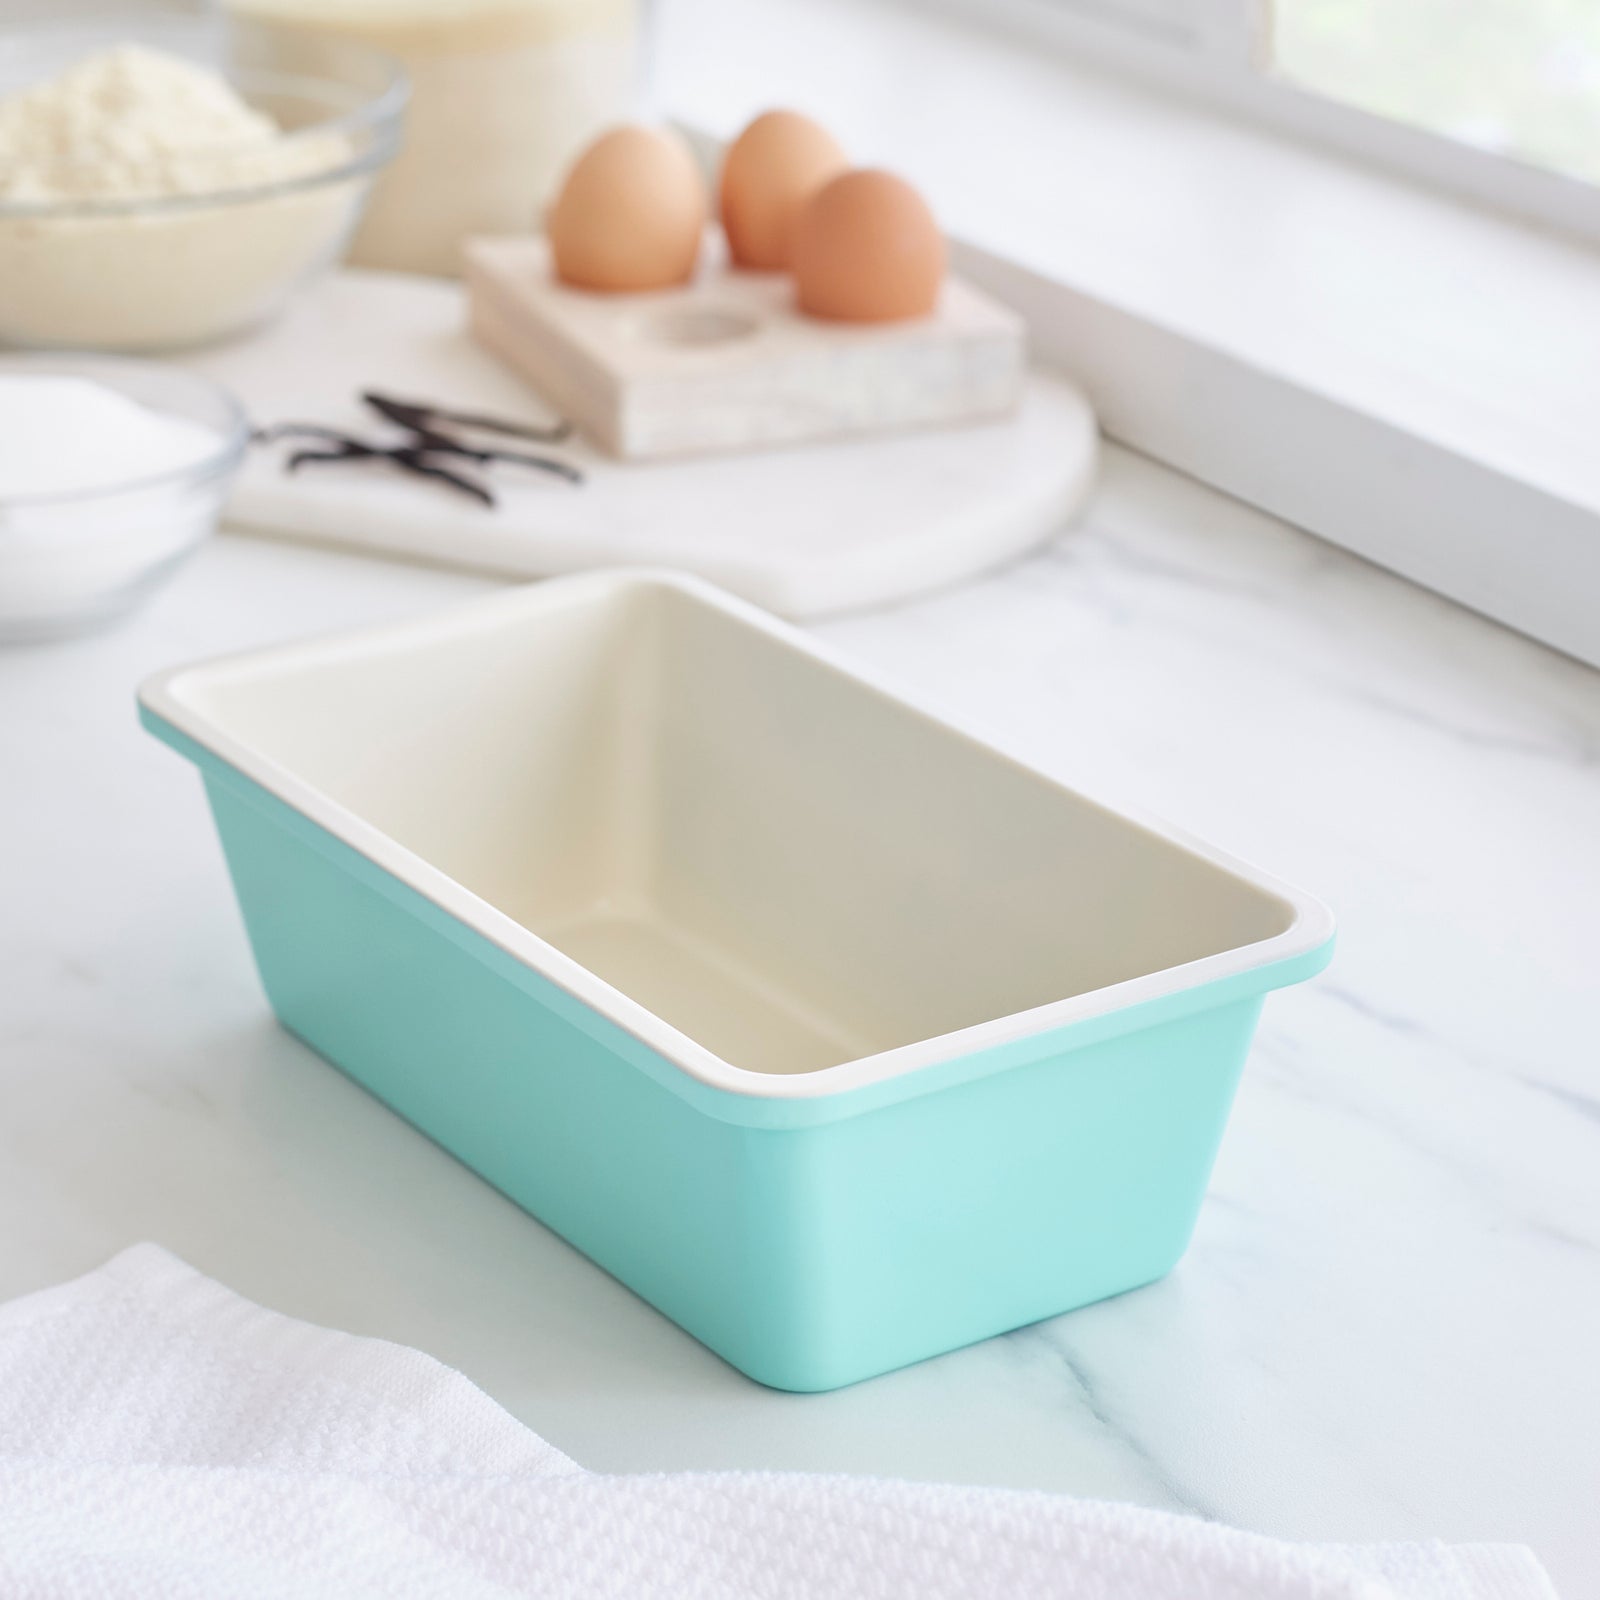 GreenLife Bakeware<br> 12pc Bakeware Sets, Turquoise